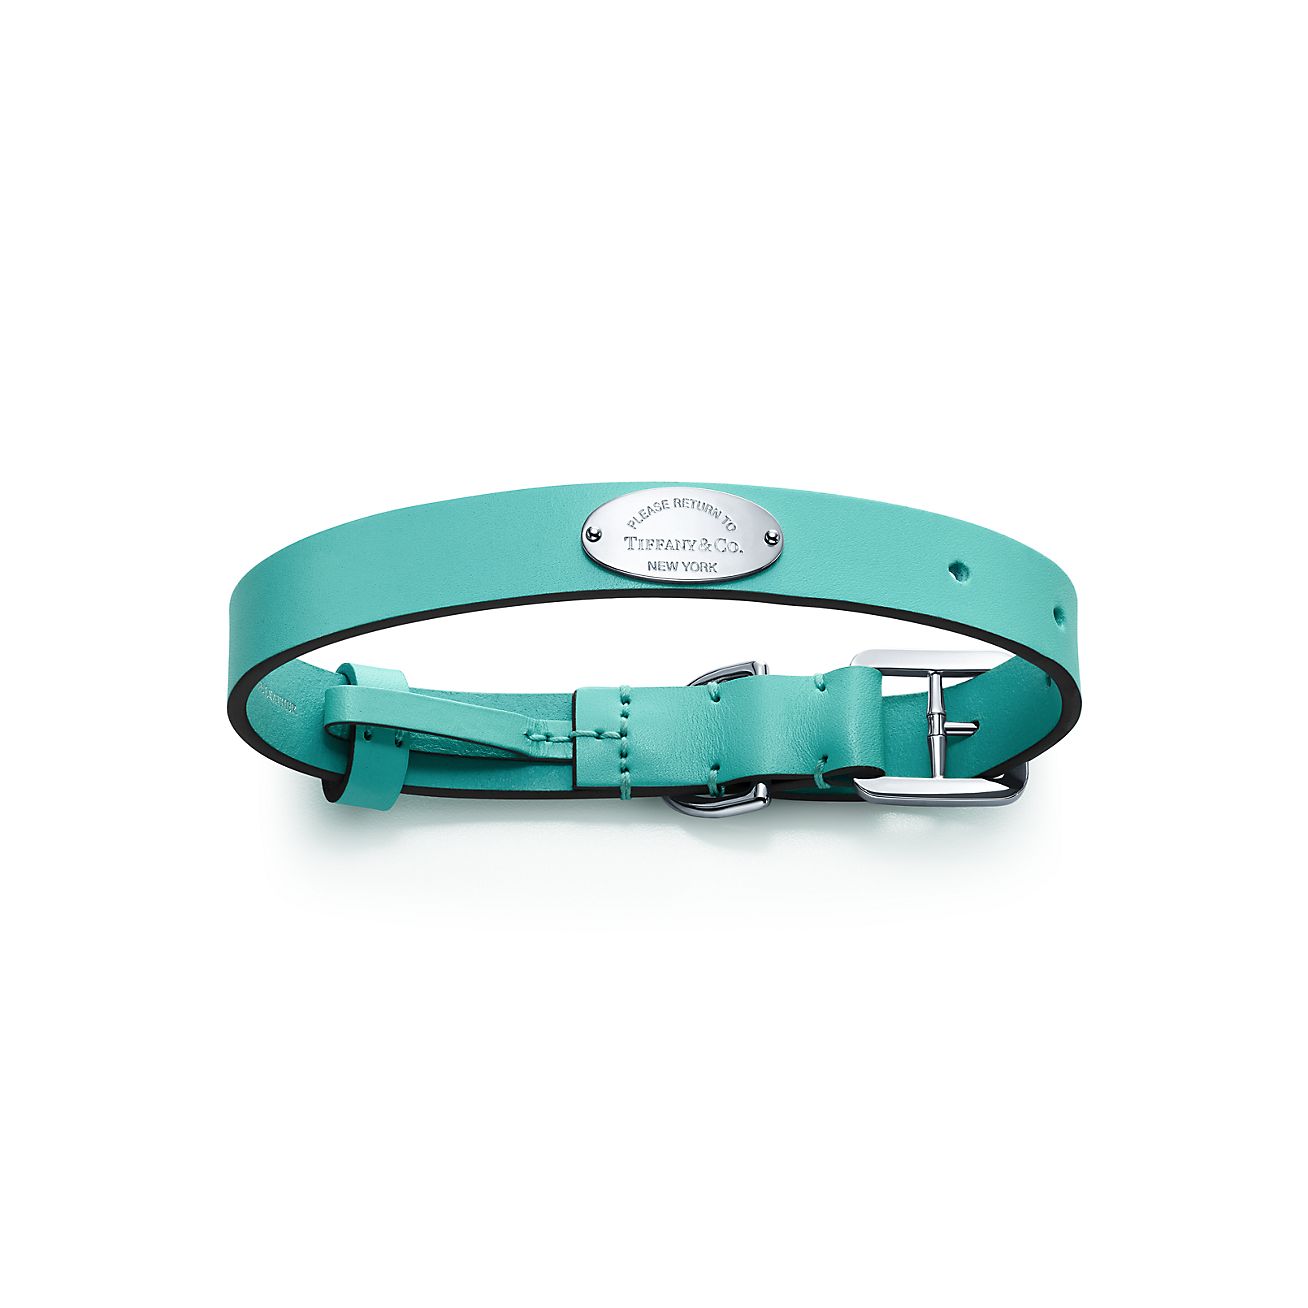 Pet Collar in Tiffany Blue Leather, Medium, Size: 11-14 in.